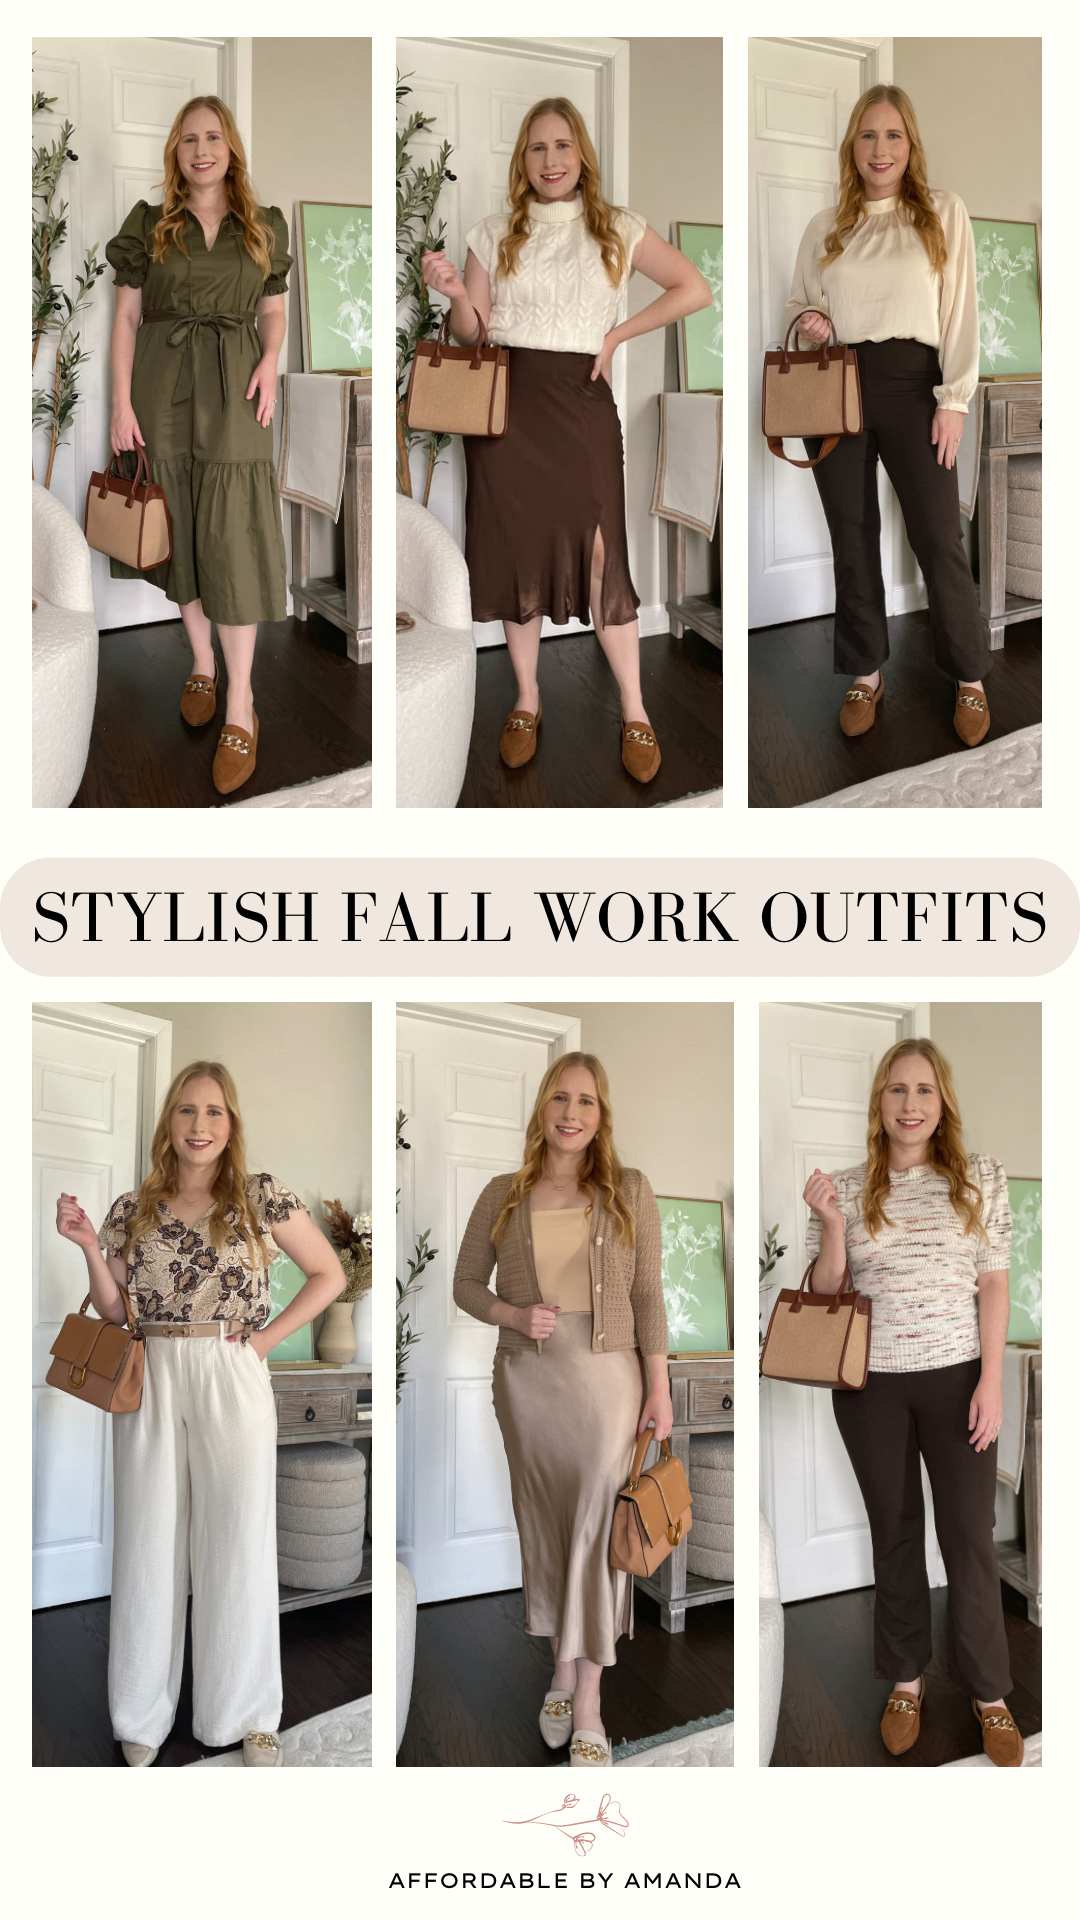 10 Stylish Fall Work Outfits to Try - Affordable by Amanda